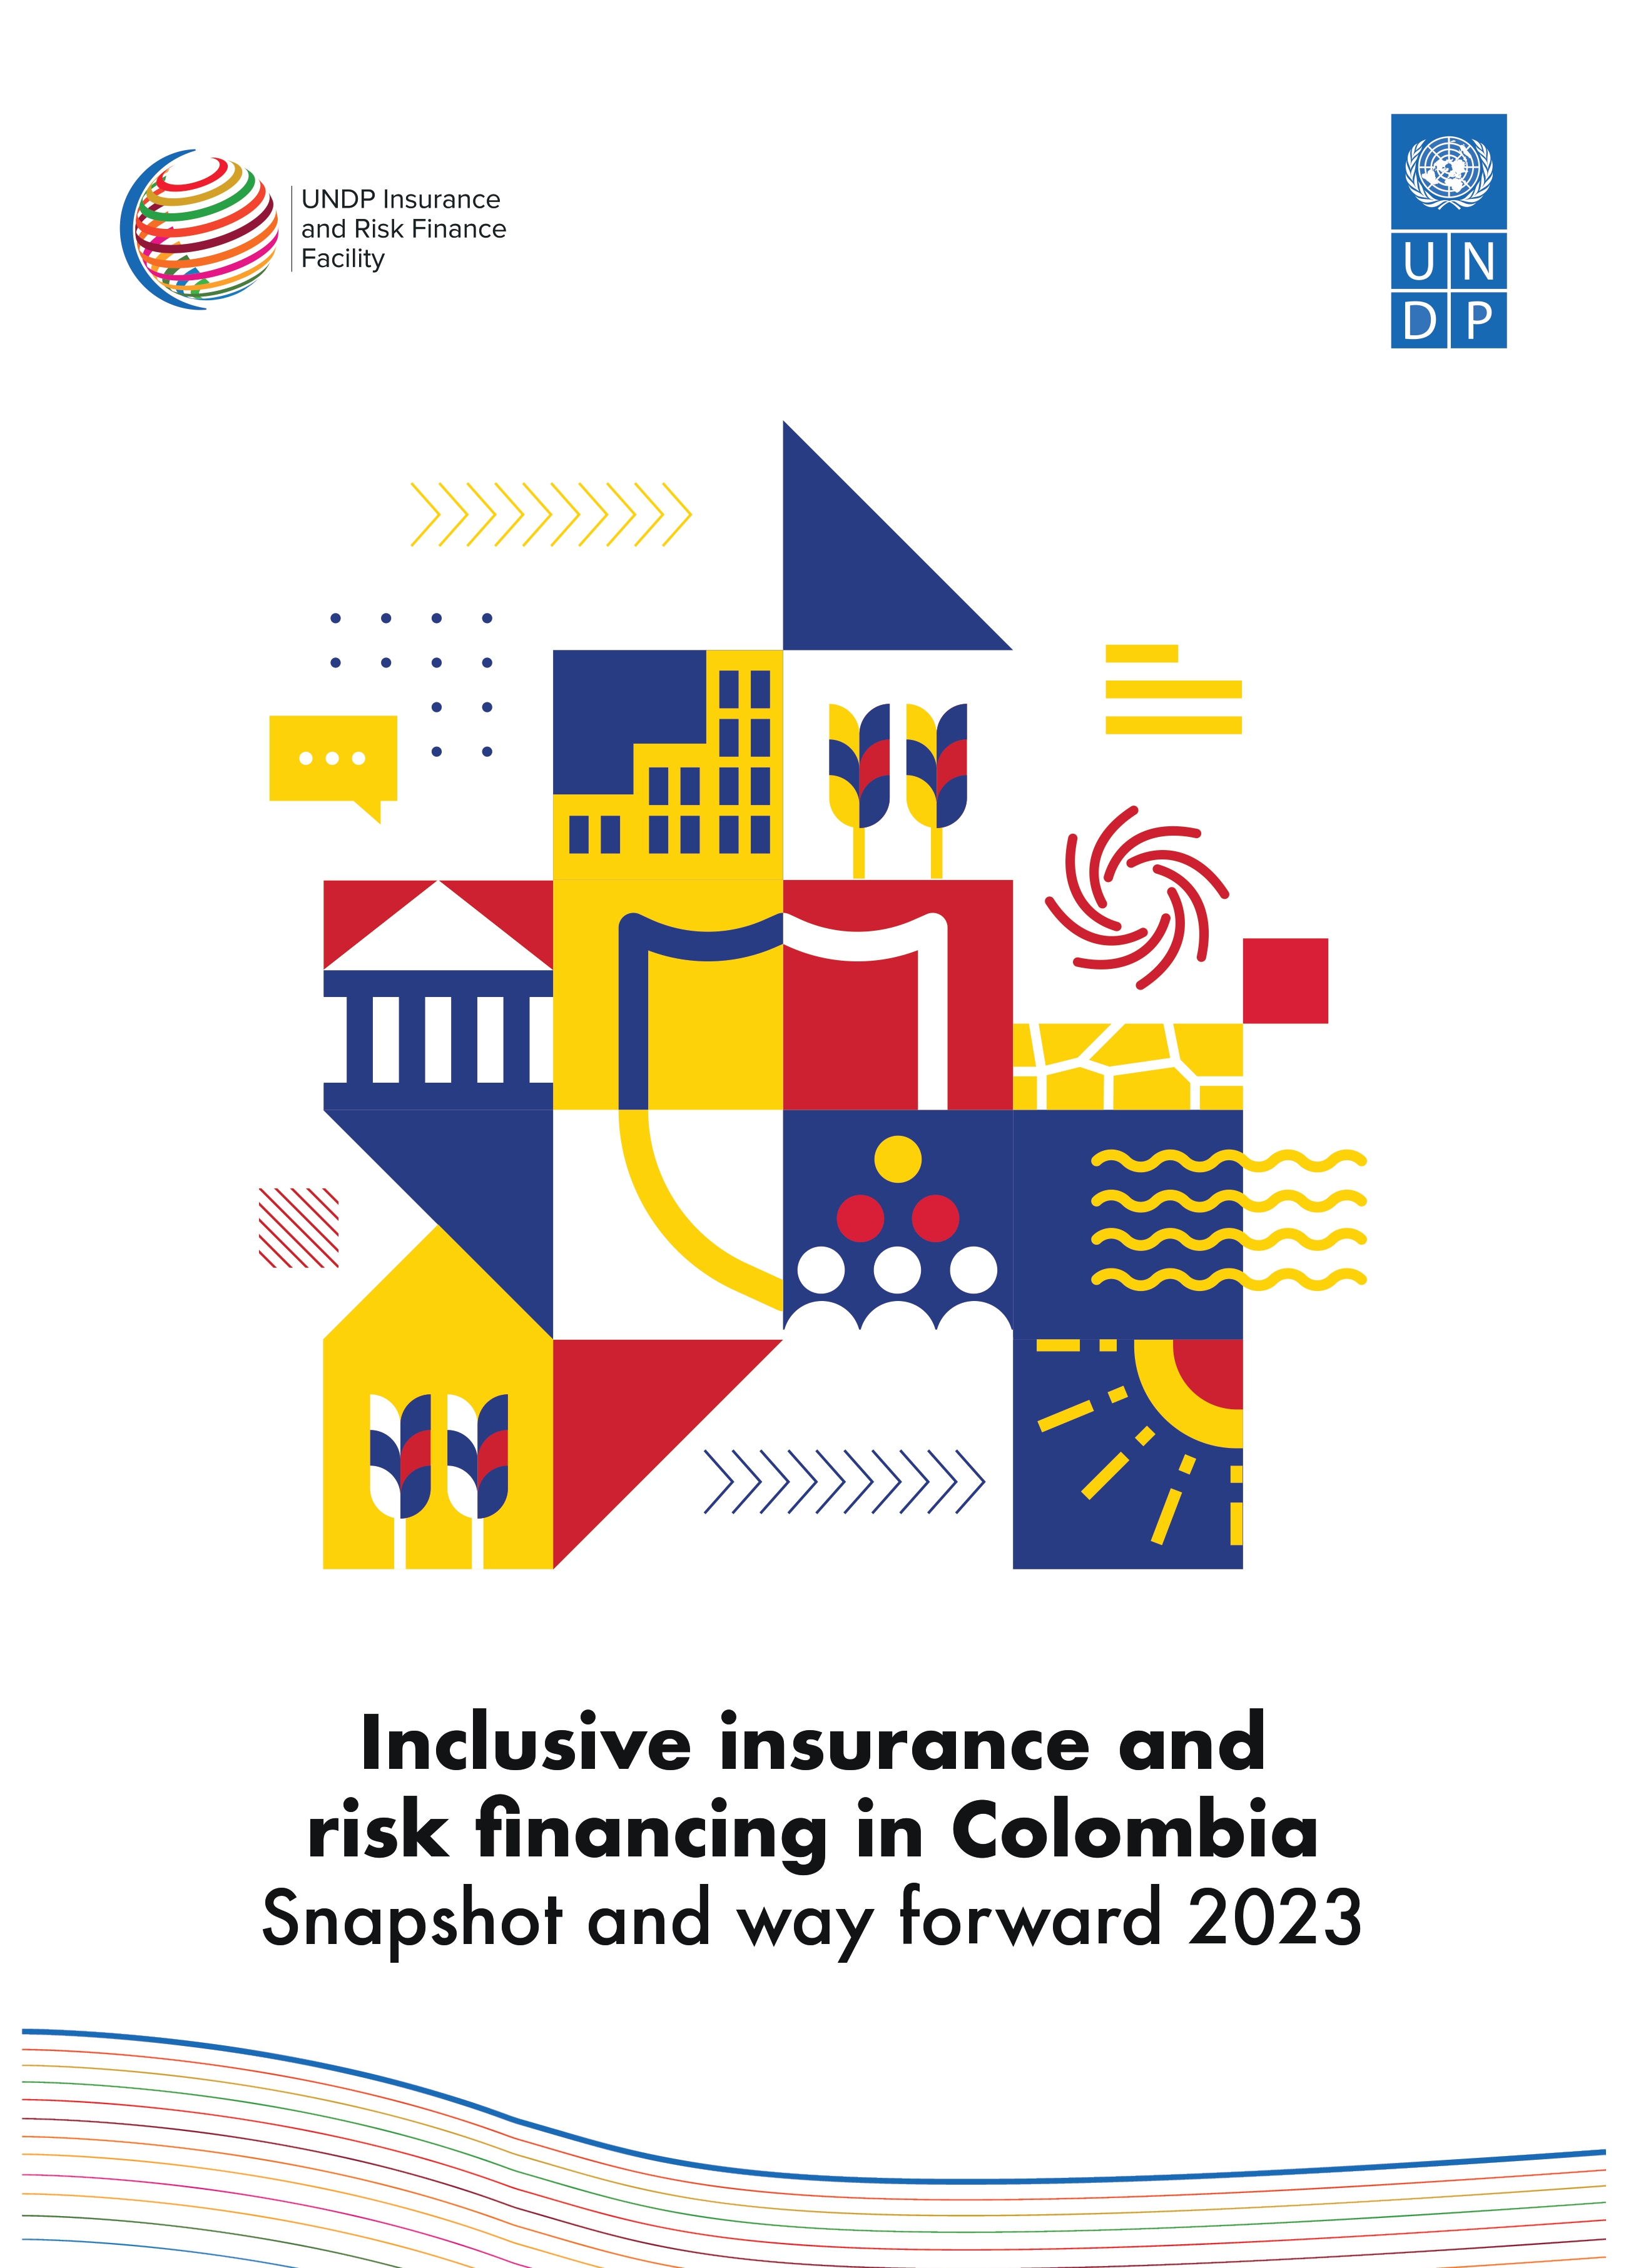 Inclusive insurance and risk financing in Colombia. Snapshot and way forward 2023